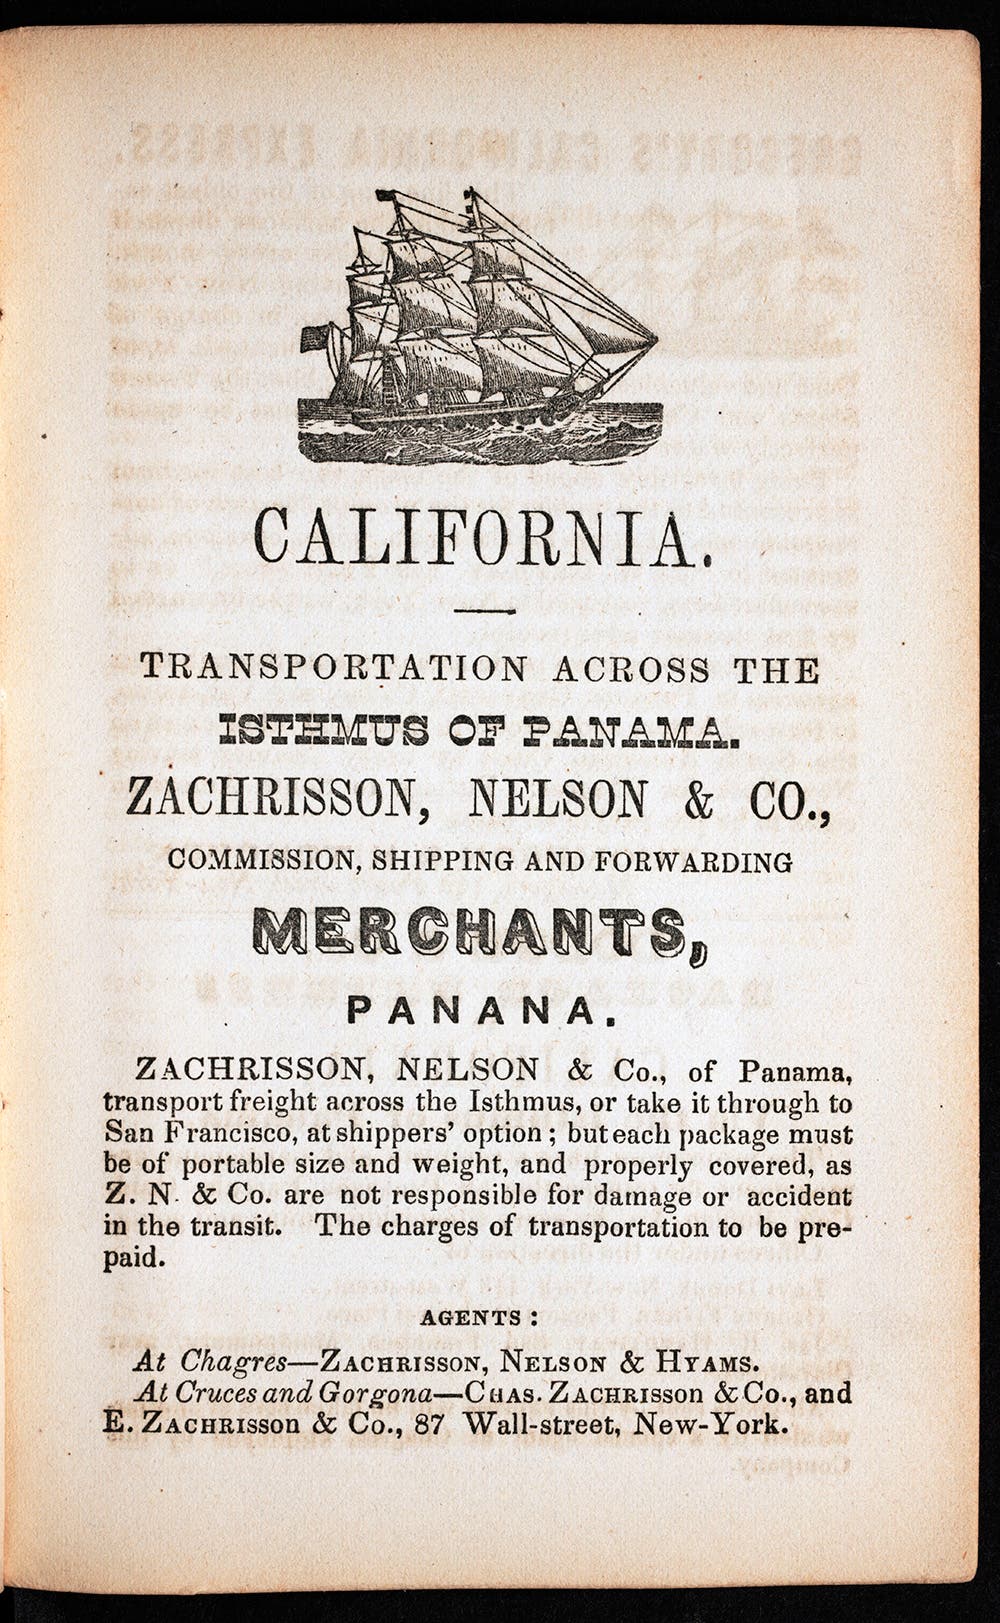 Advertisement for transportation across the Isthmus. From E.L. Autenrieth, A topographical map of the Isthmus of Panama. New York, 1851.